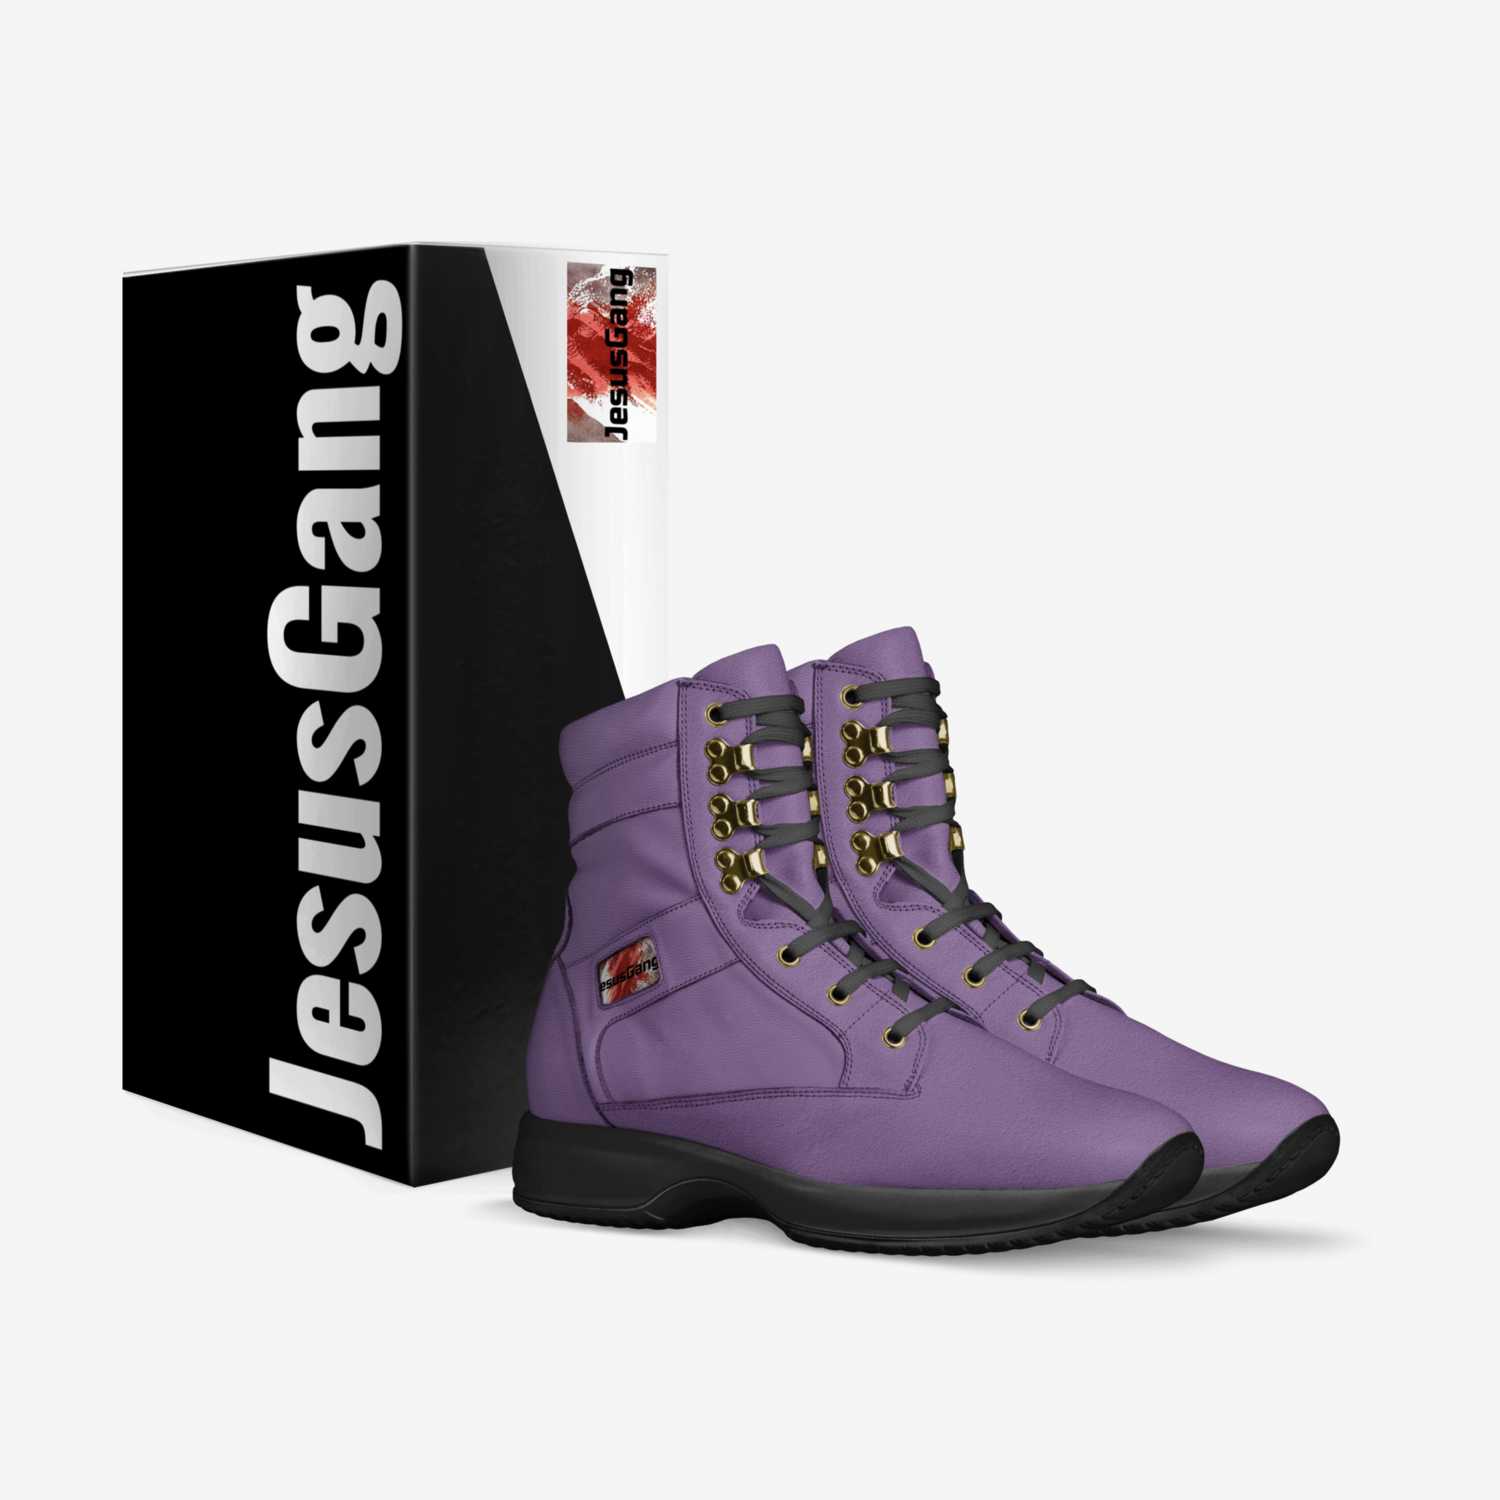 JesusGang Grapes custom made in Italy shoes by Lumont Deshield | Box view